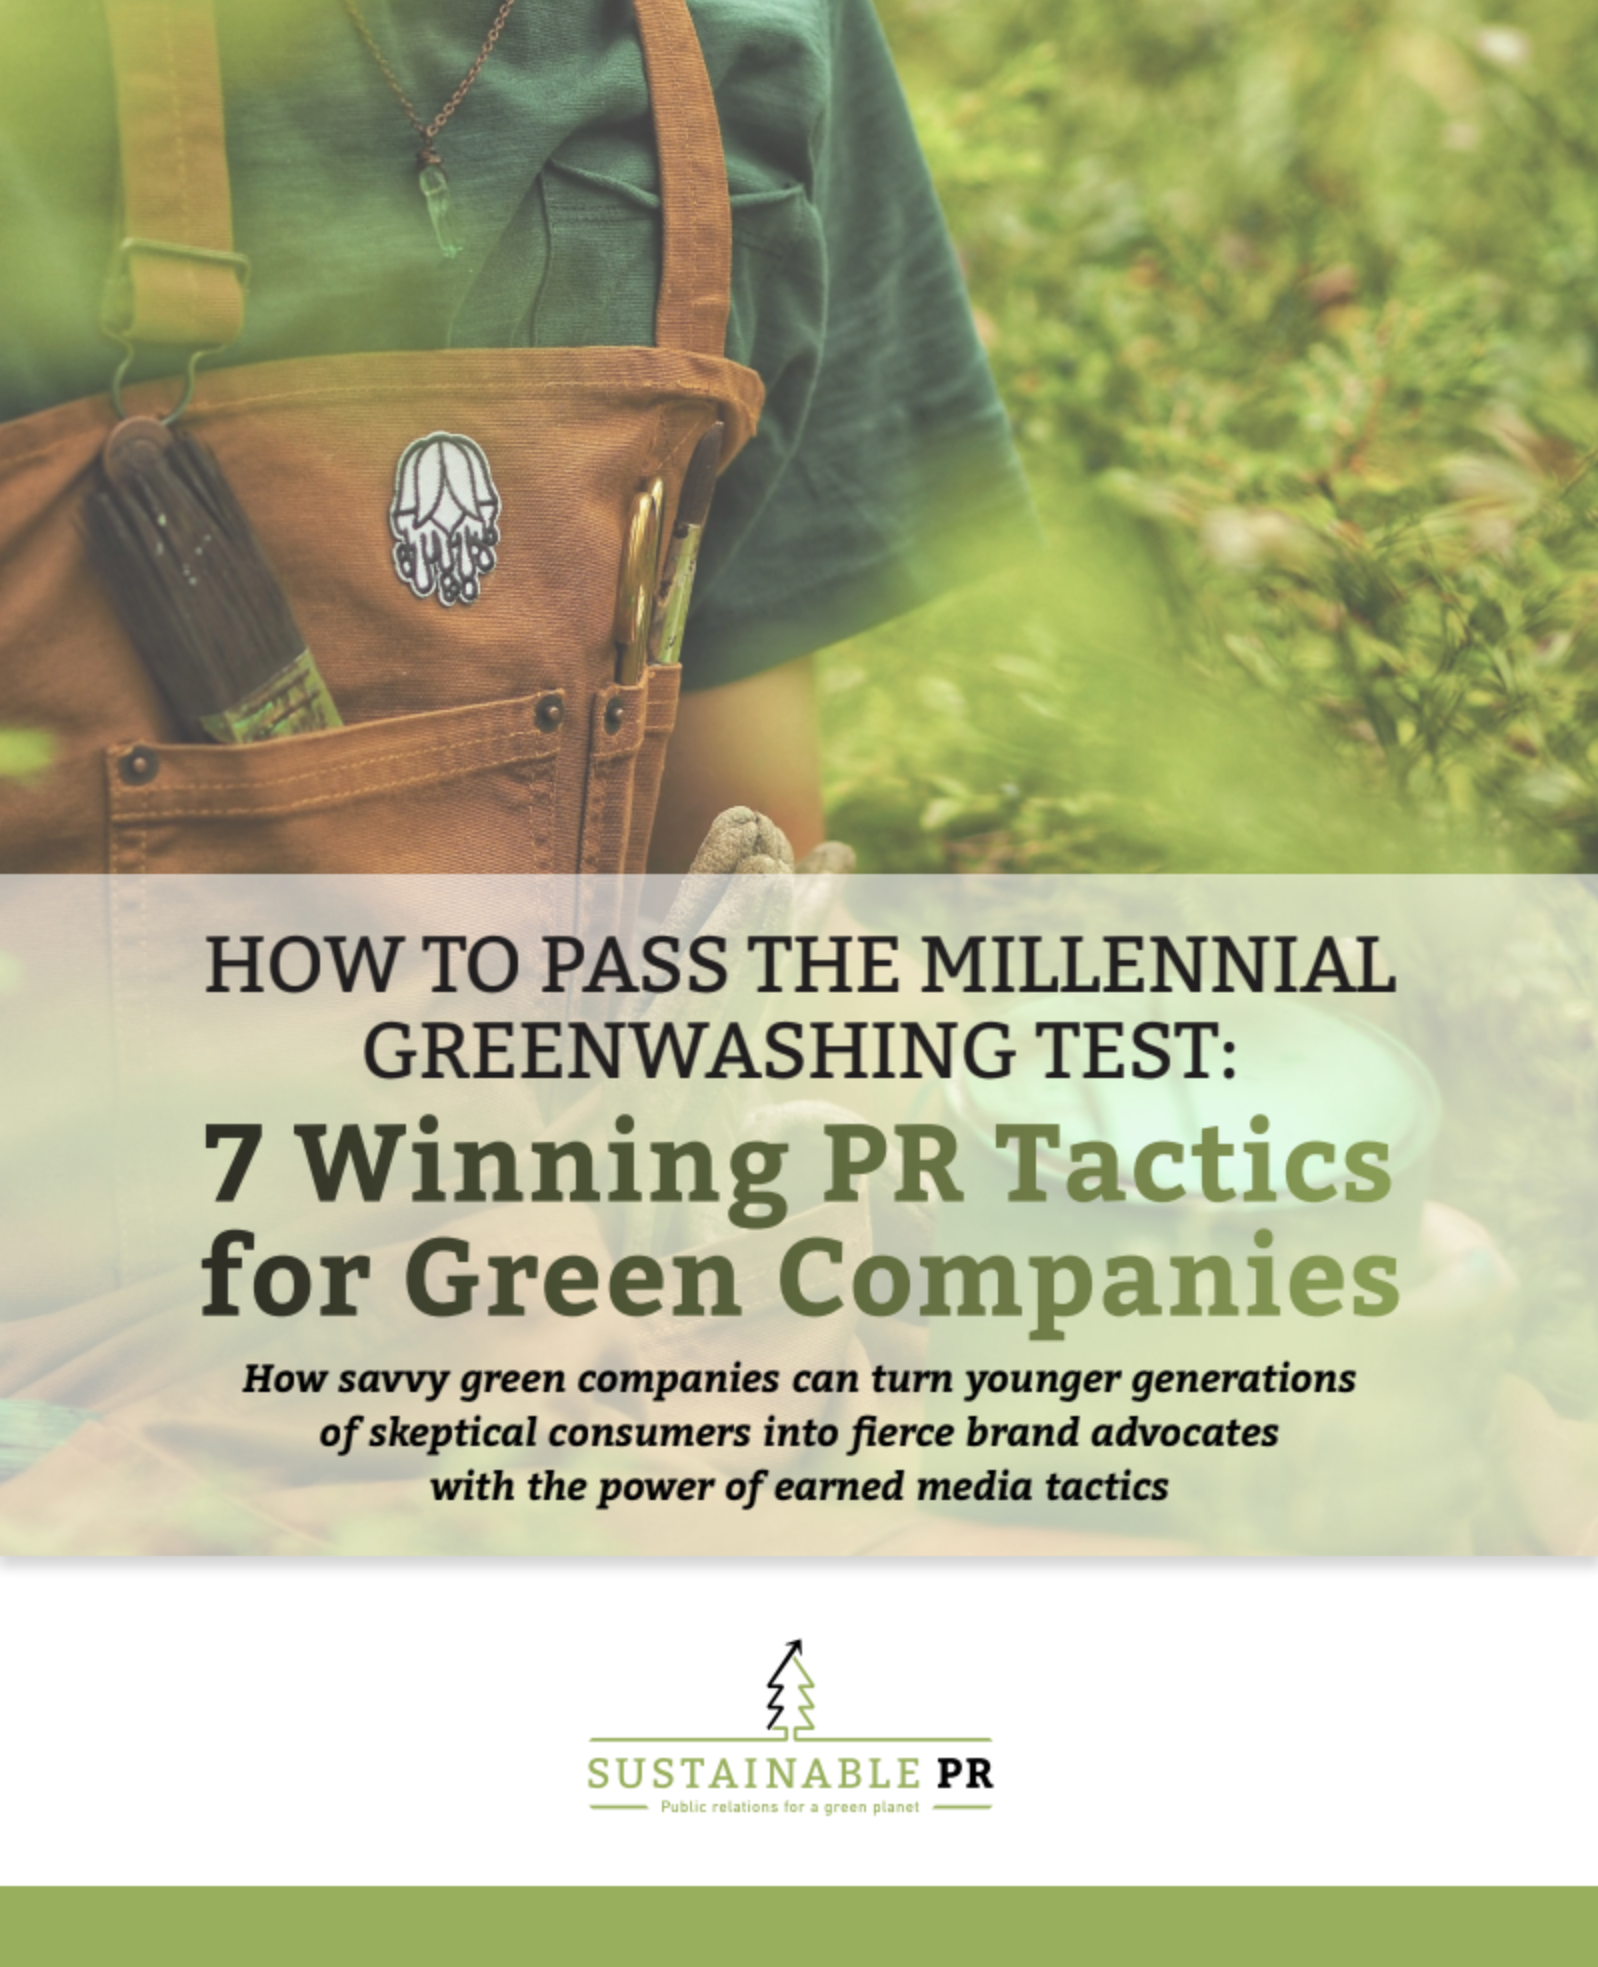 Wells College Center for Sustainability and Environment Webinar Series: SPR’s 7 Winning PR Tips for Green Companies